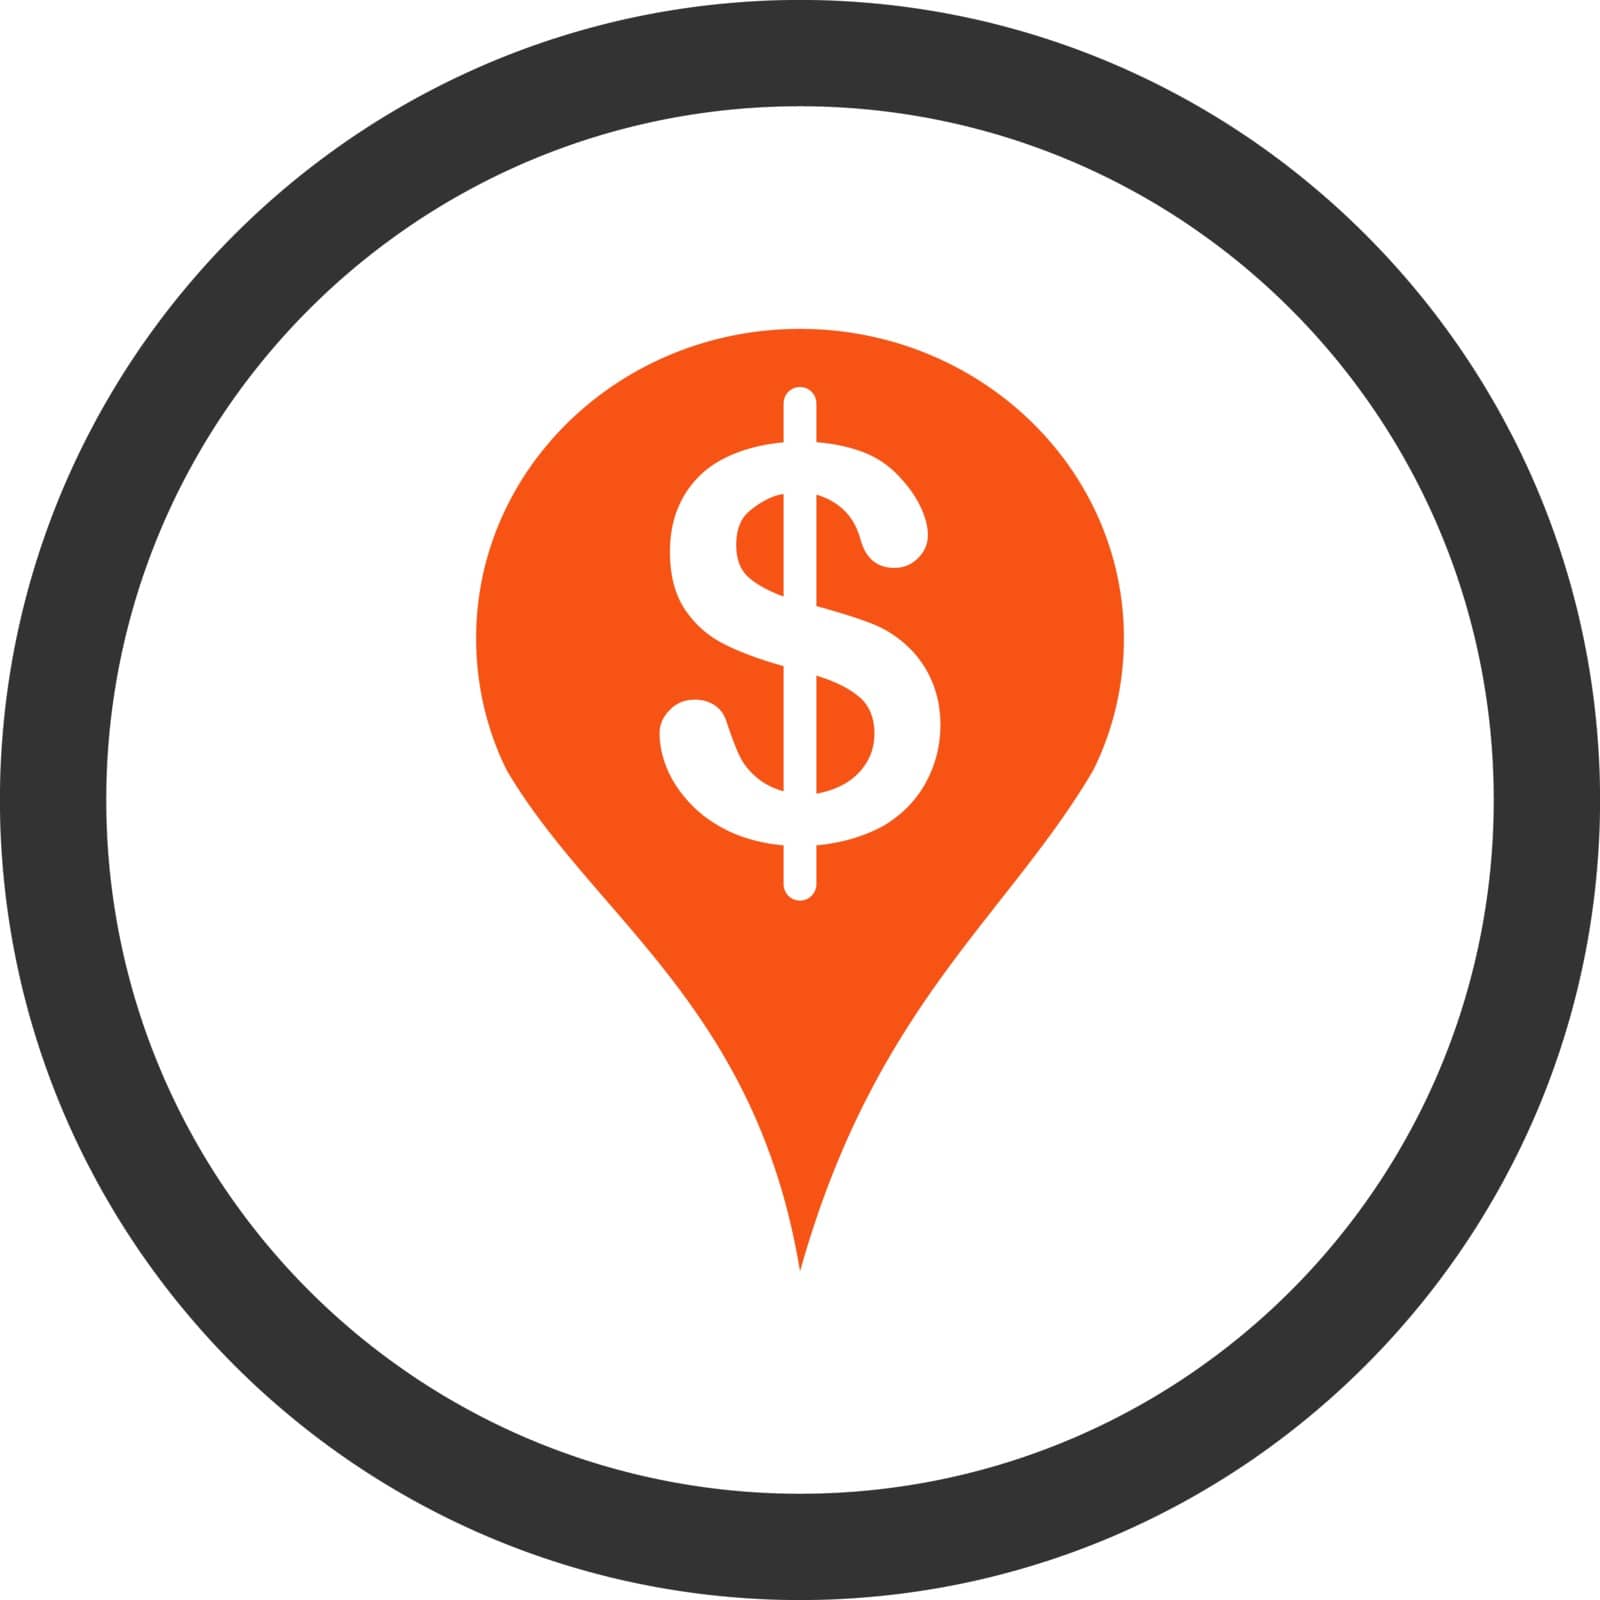 Placement vector icon. This flat rounded symbol uses orange and gray colors and isolated on a white background.